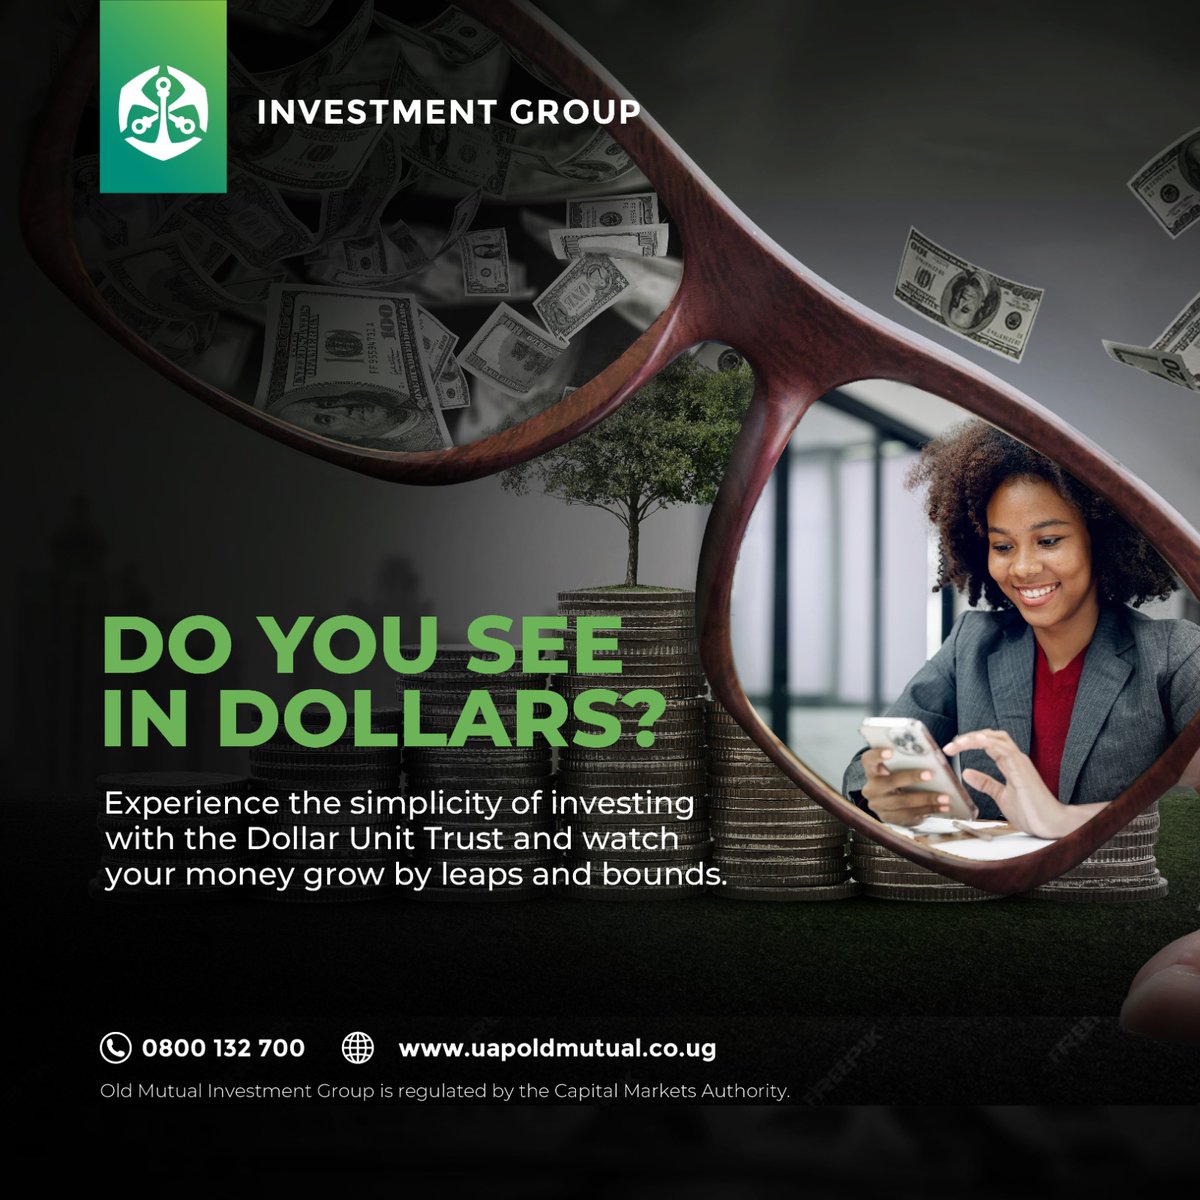 Investing in dollars has never been easier with the #DollarUnitTrust Fund, where you join a community of investors with a collective portfolio mindset. Let @UAPOldMutualUg's financial experts guide you towards smart wealth growth. 
#TutambuleFfena